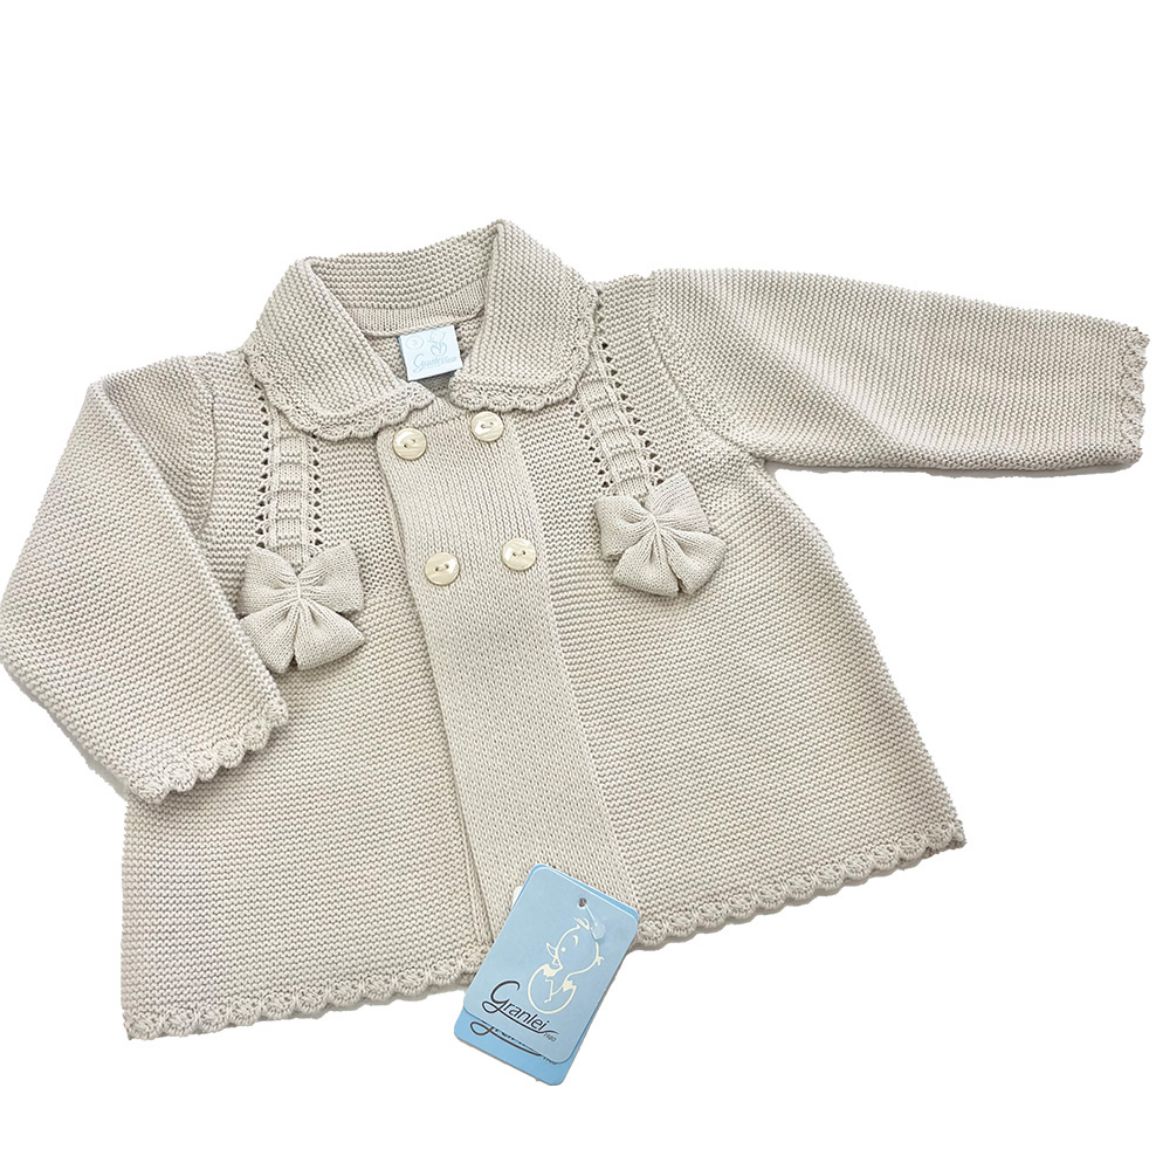 Picture of Granlei Girls Beige Knitted Cardigan with Bow Detail